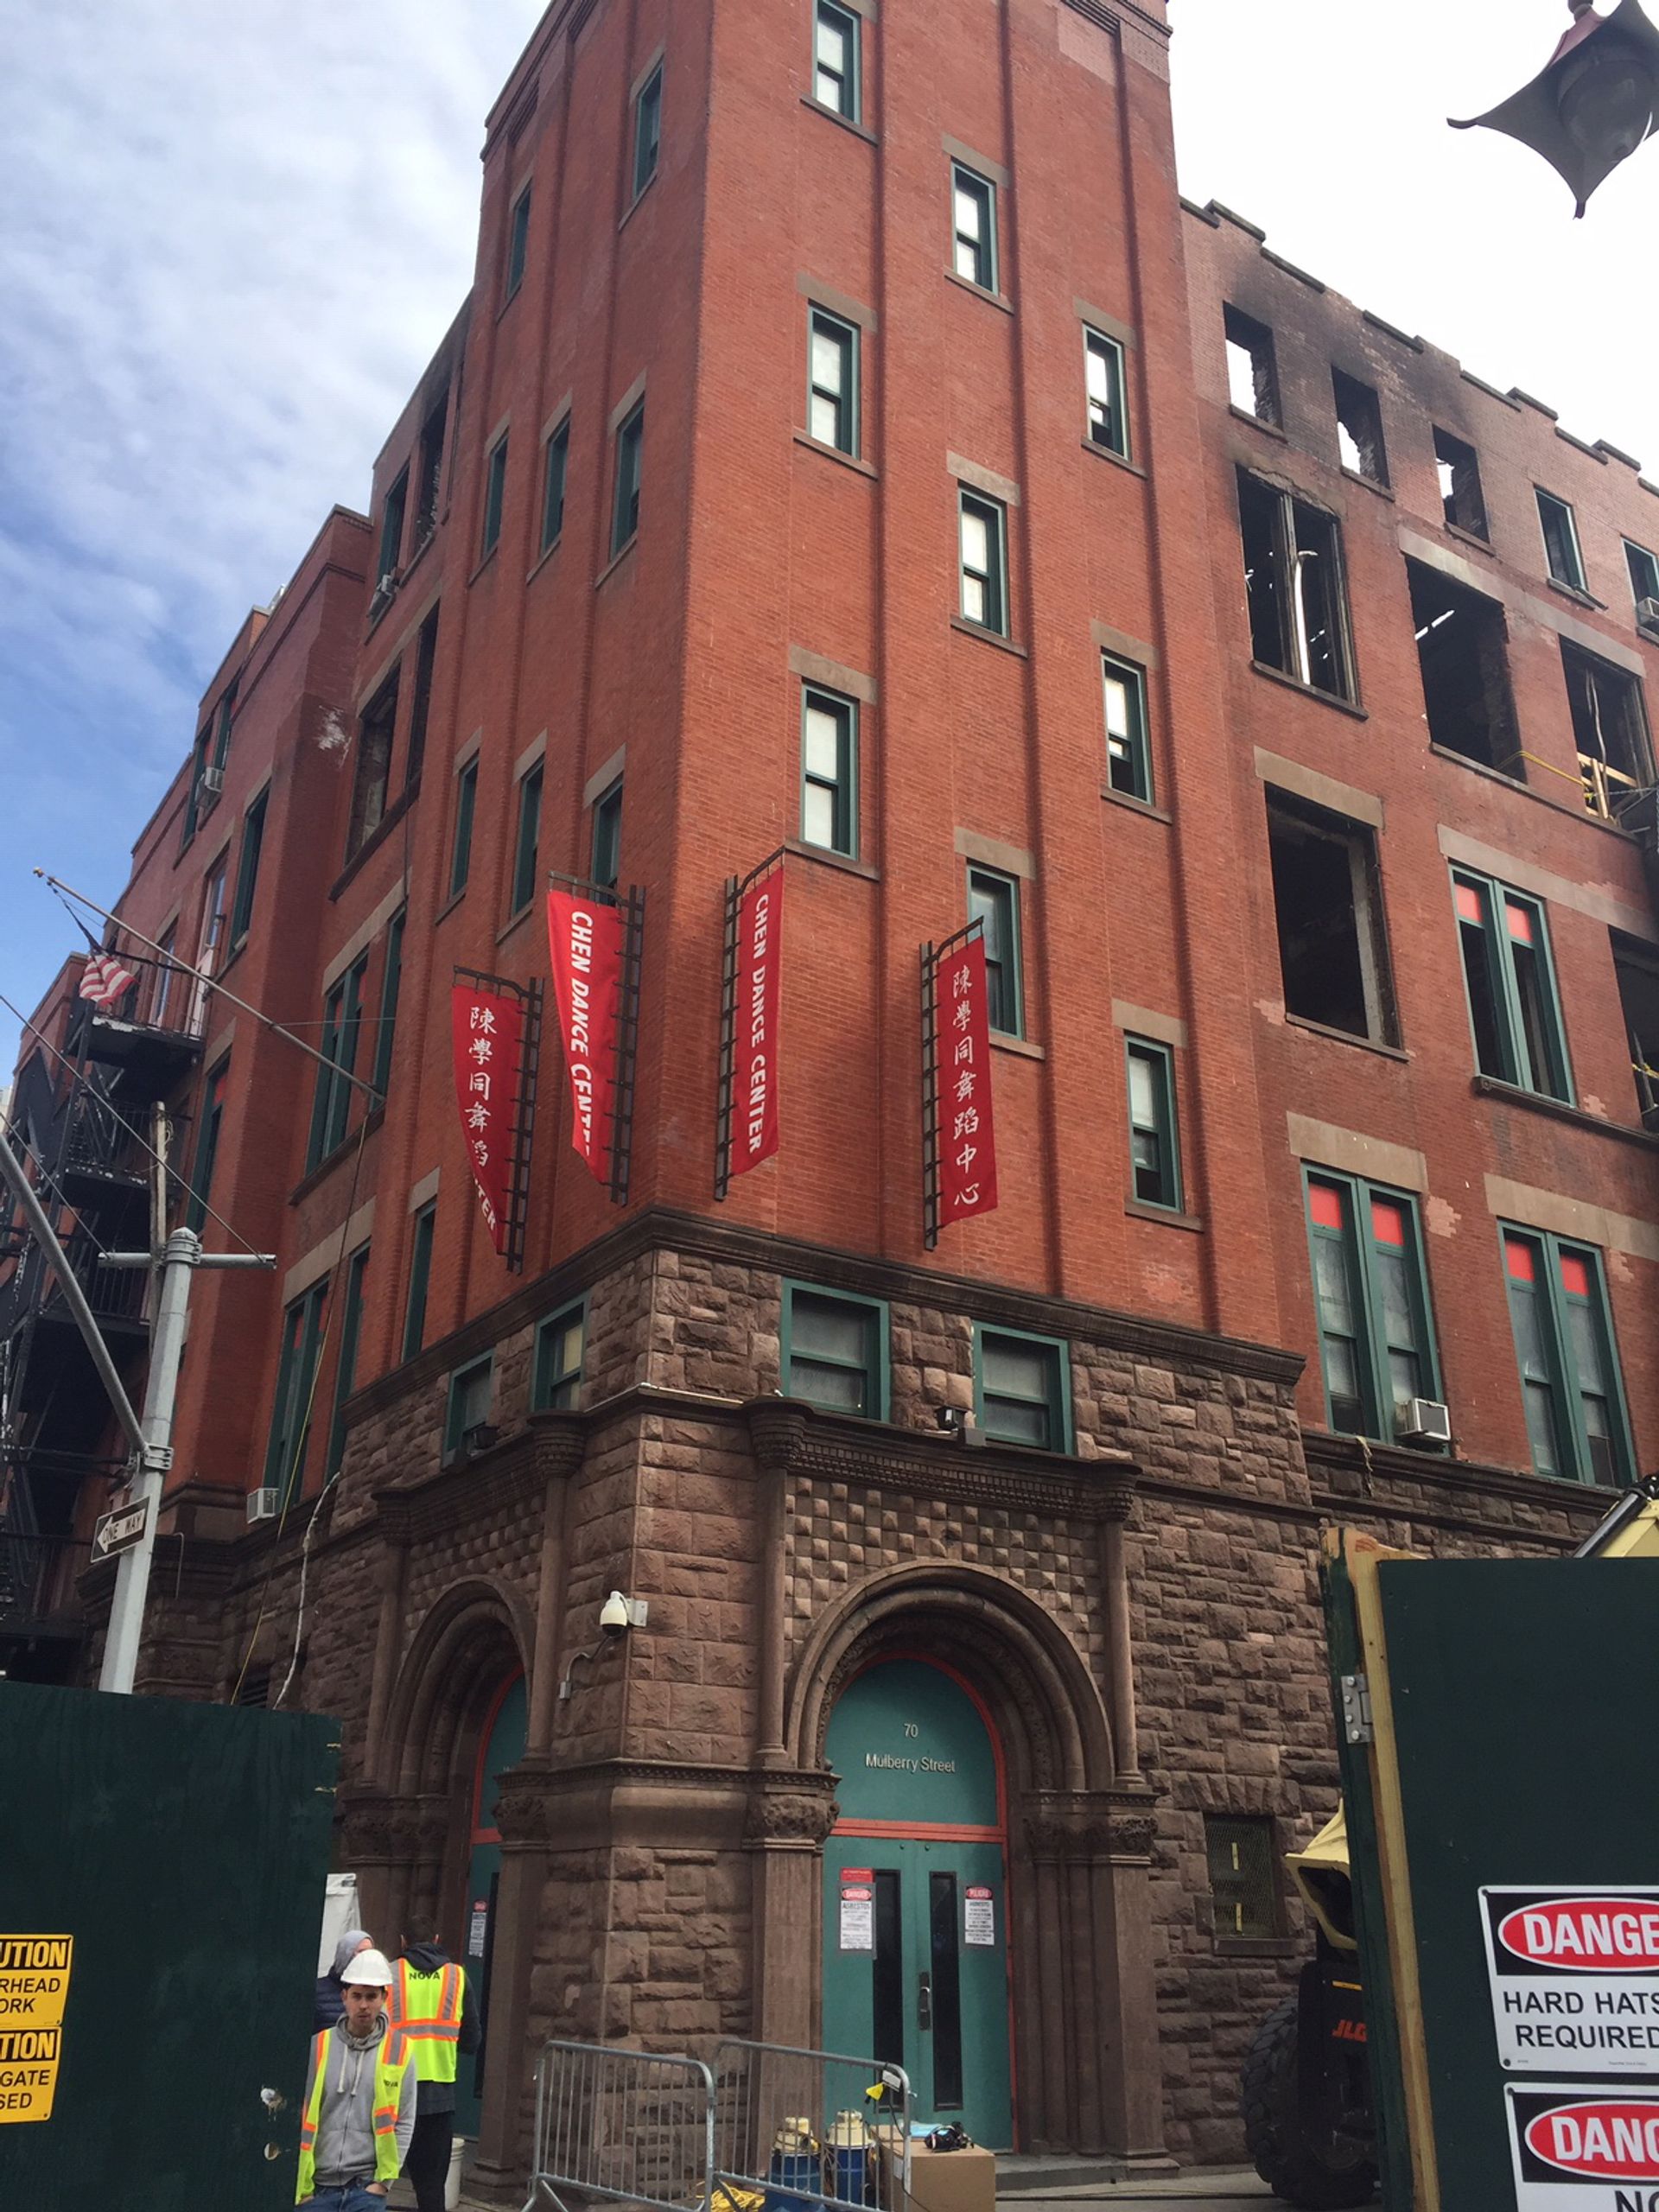 The damaged building in New York's Chinatown that houses the archives of the Museum of Chinese in America Nancy Kenney